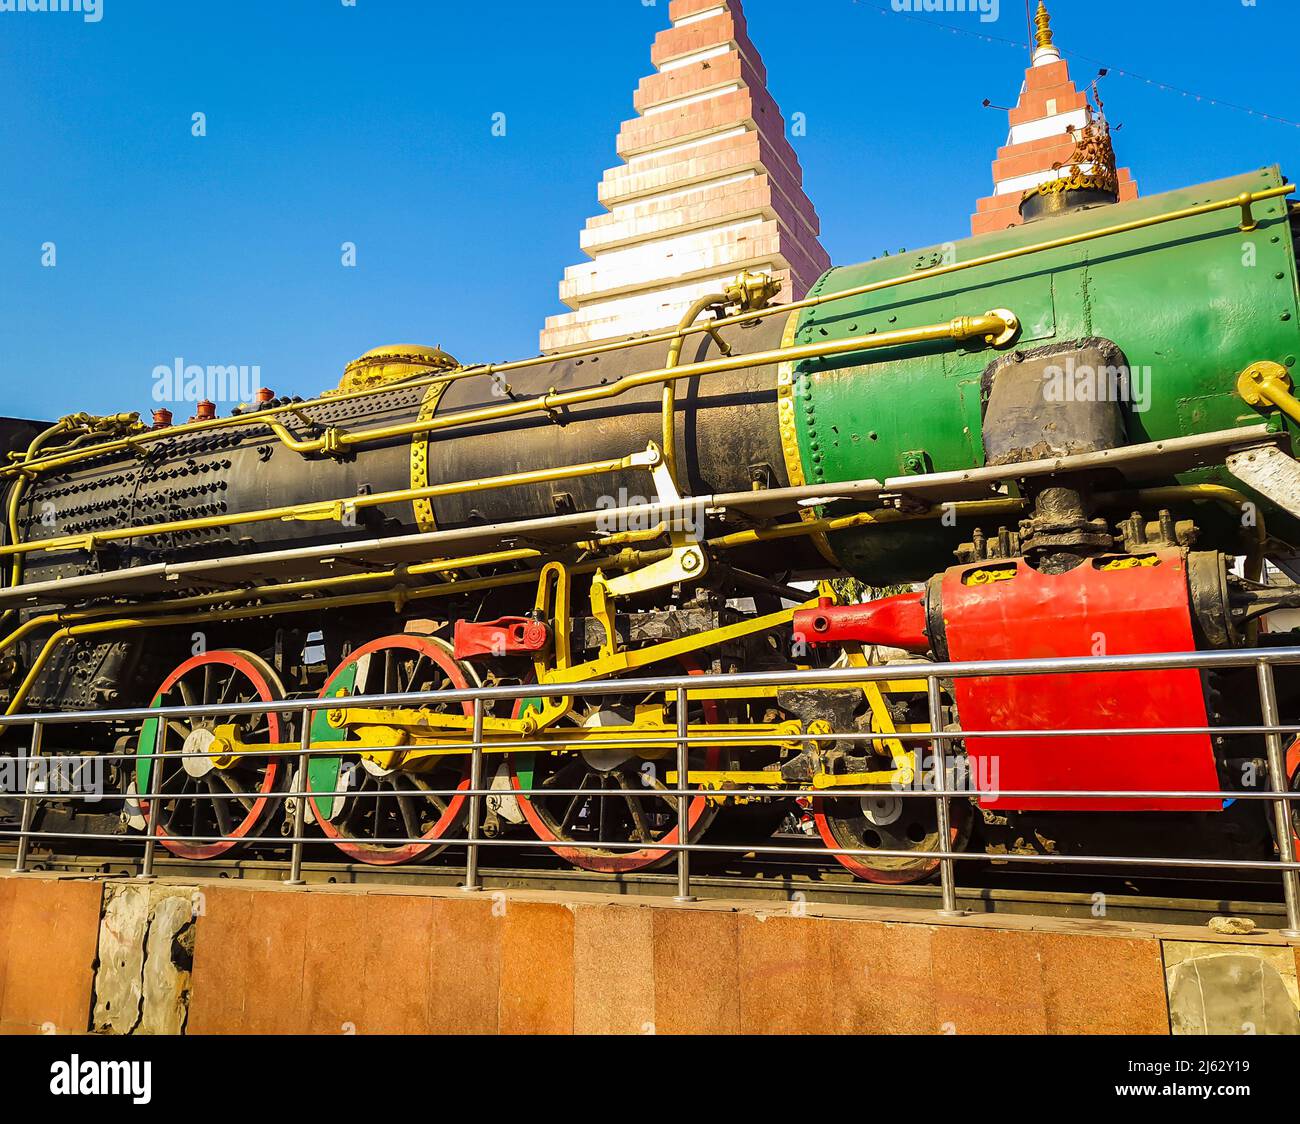 vintage steam rail engine with temple and blue sky background at day image is taken patna college patna bihar india on Apr 15 2022. Stock Photo